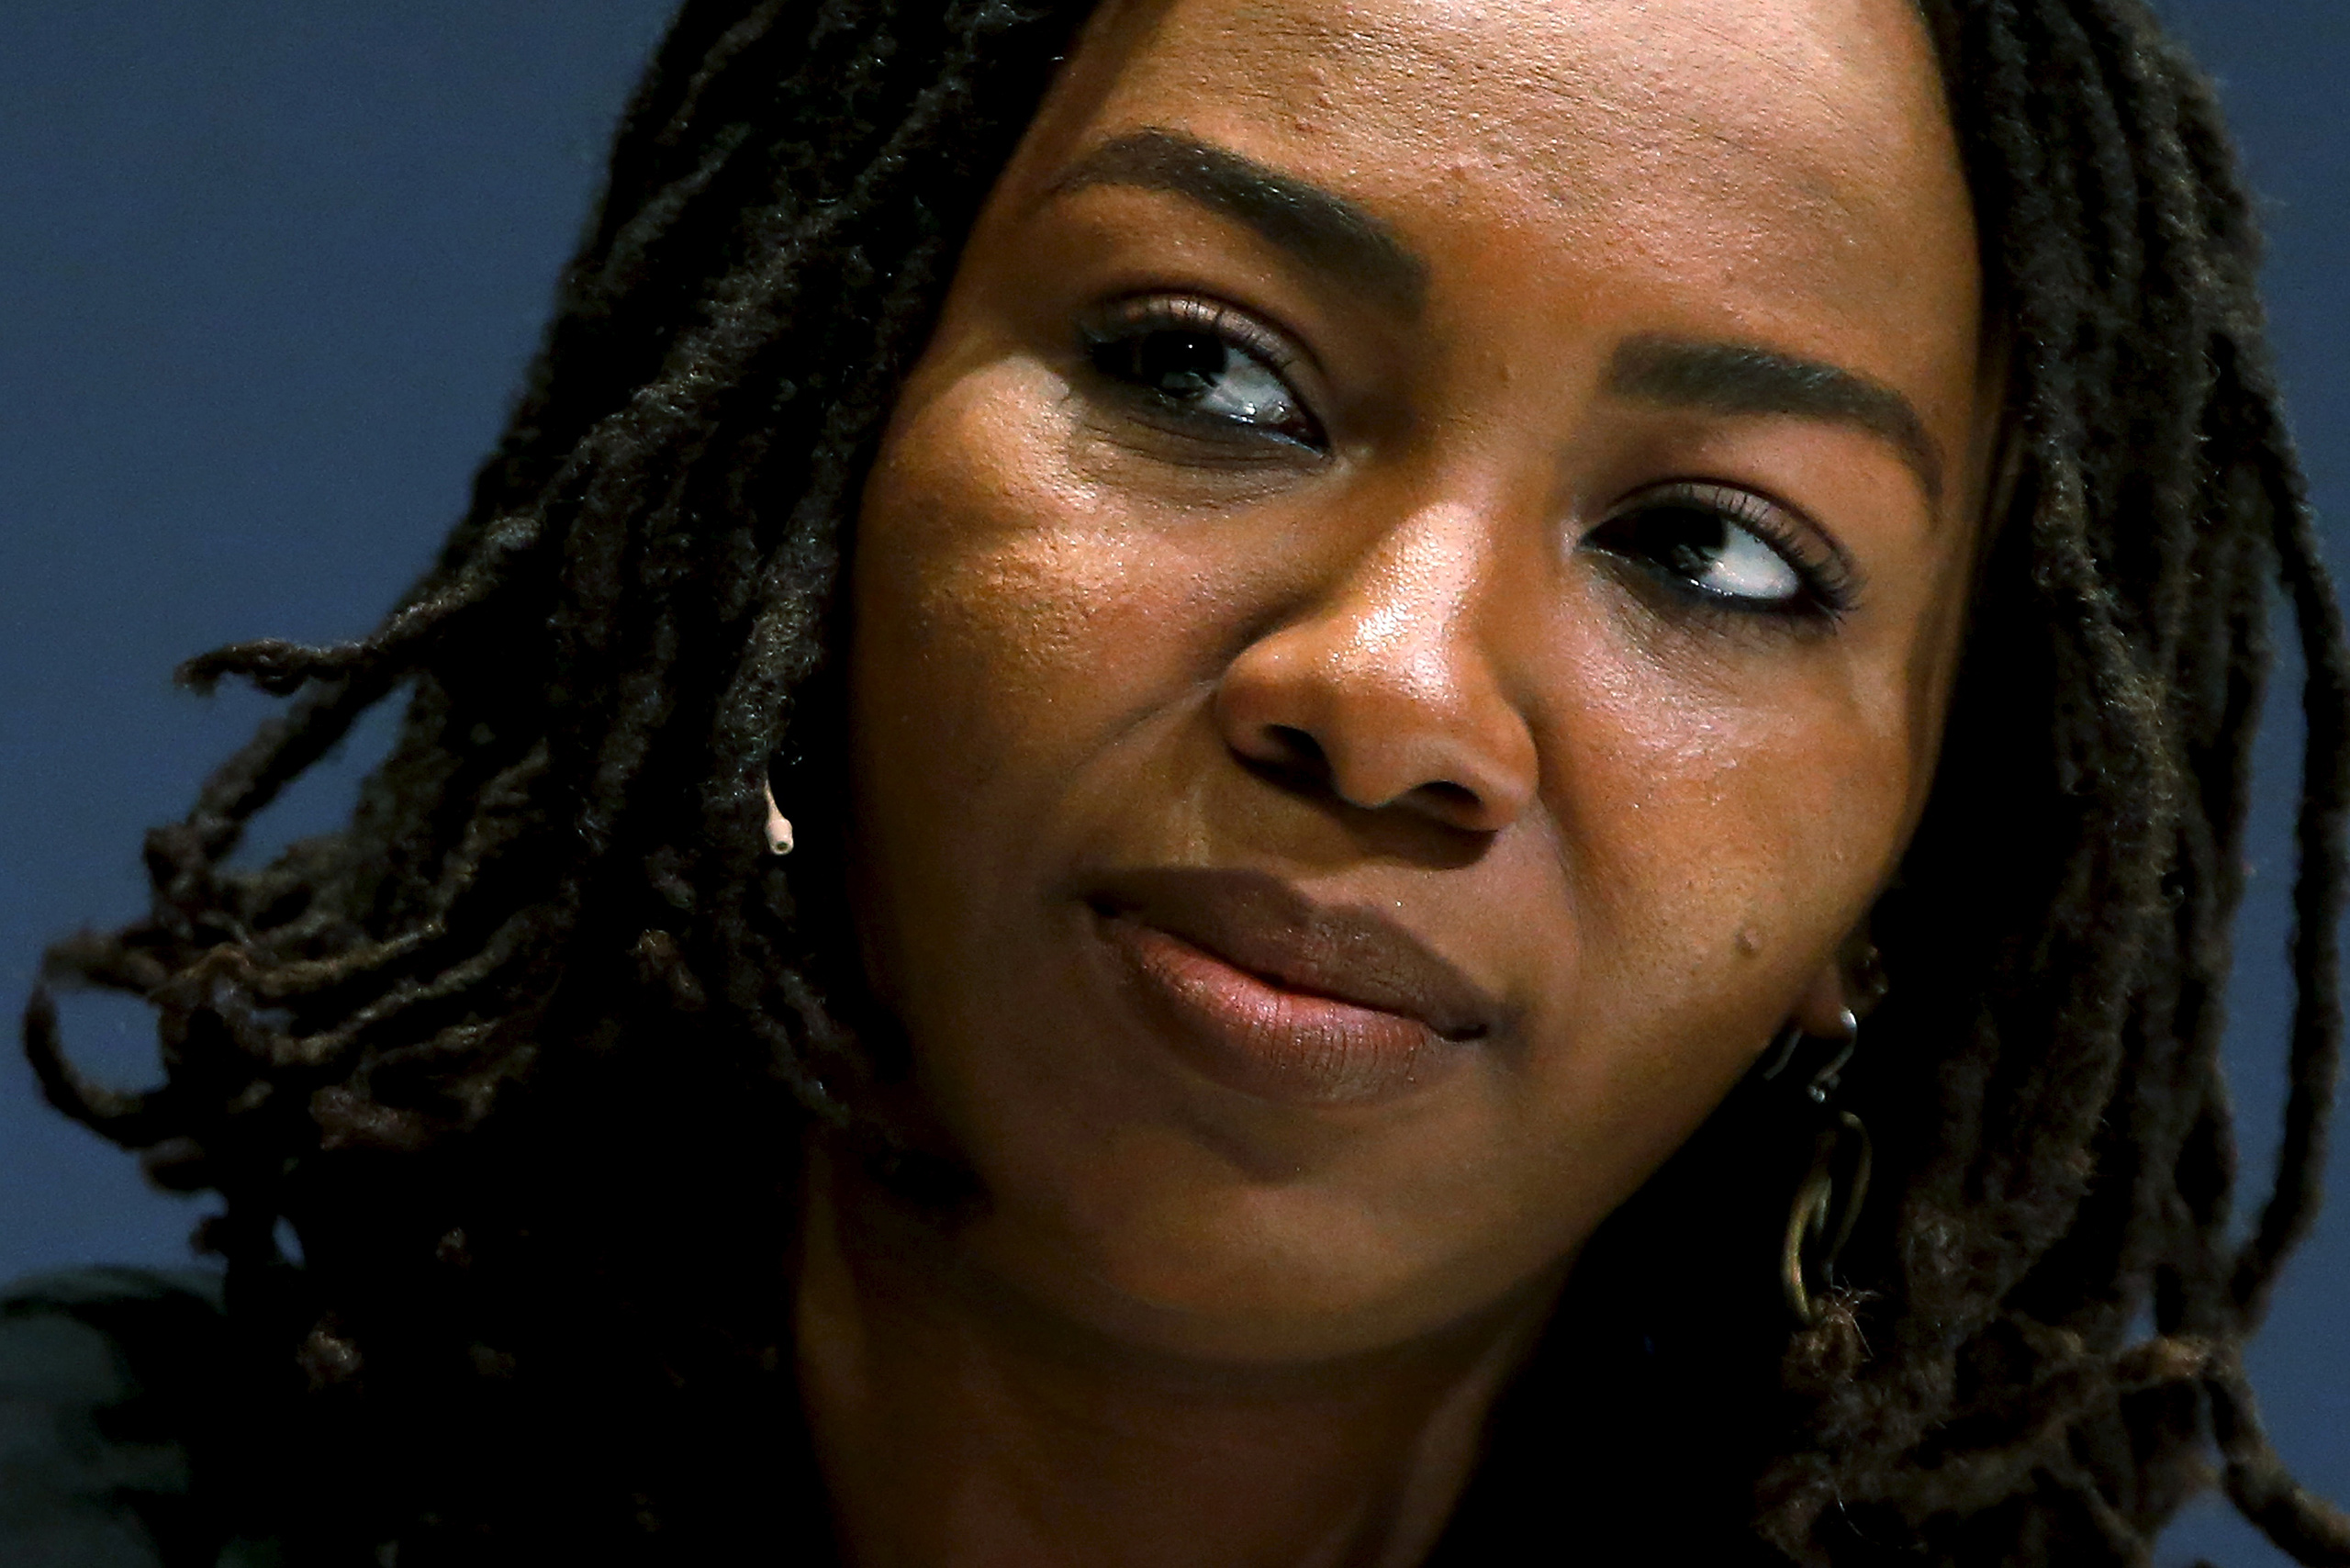 Tometi, the co-founder of the #BlackLivesMatter movement, takes part in an onstage interview at the Washington Ideas Forum in Washington